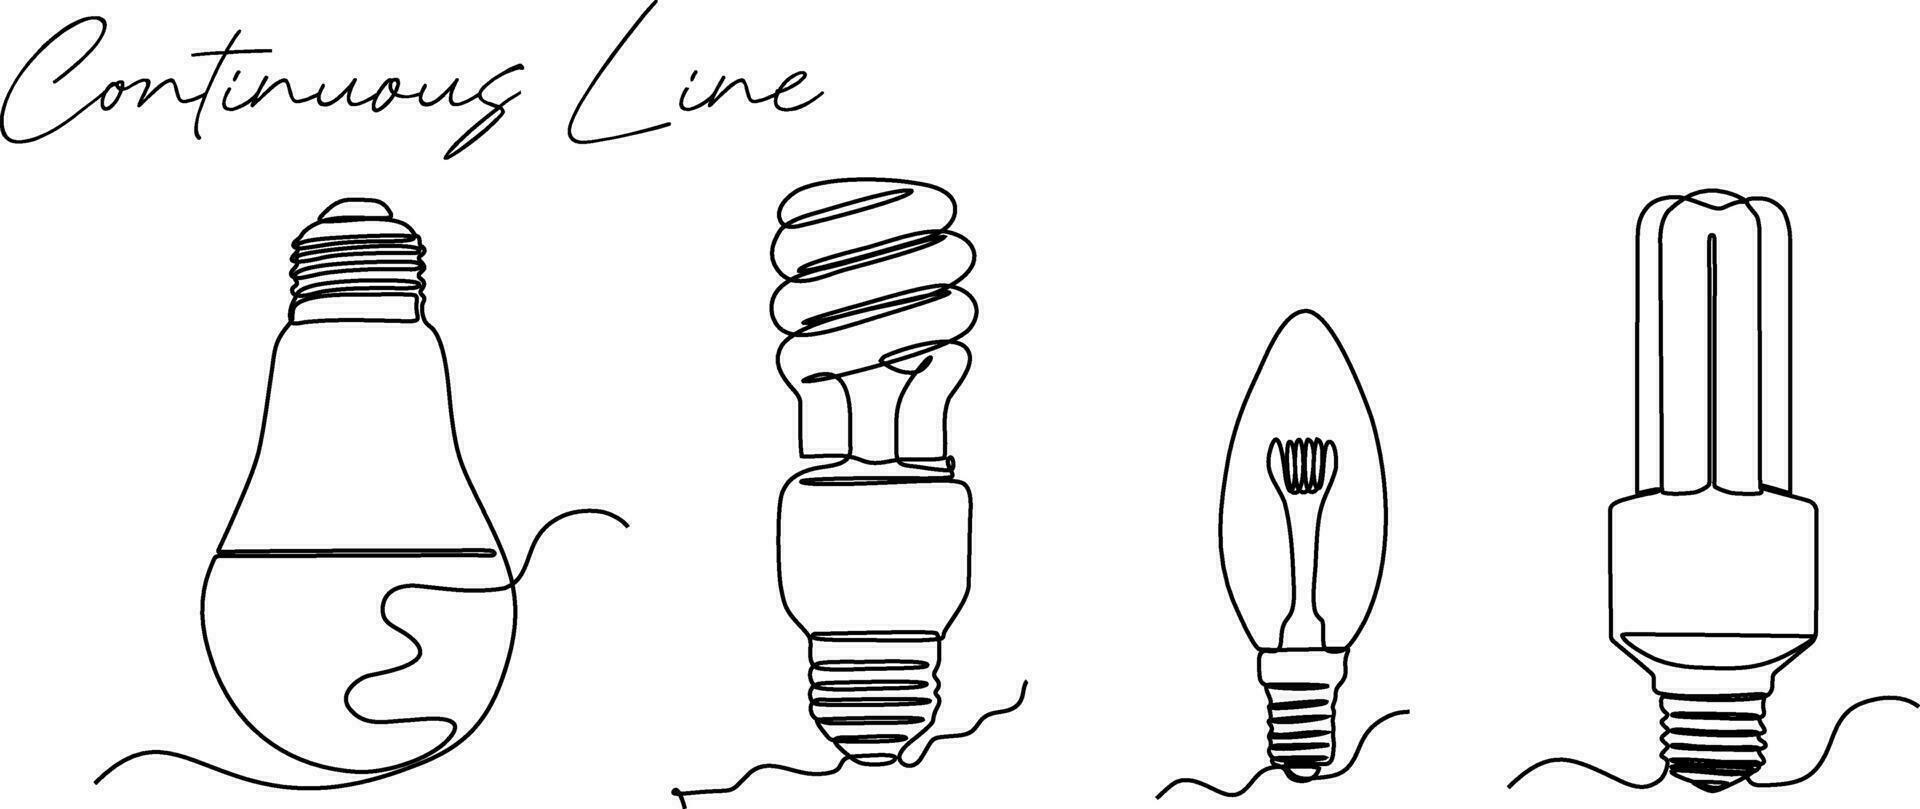 lightbulb continuous line drawing set vector